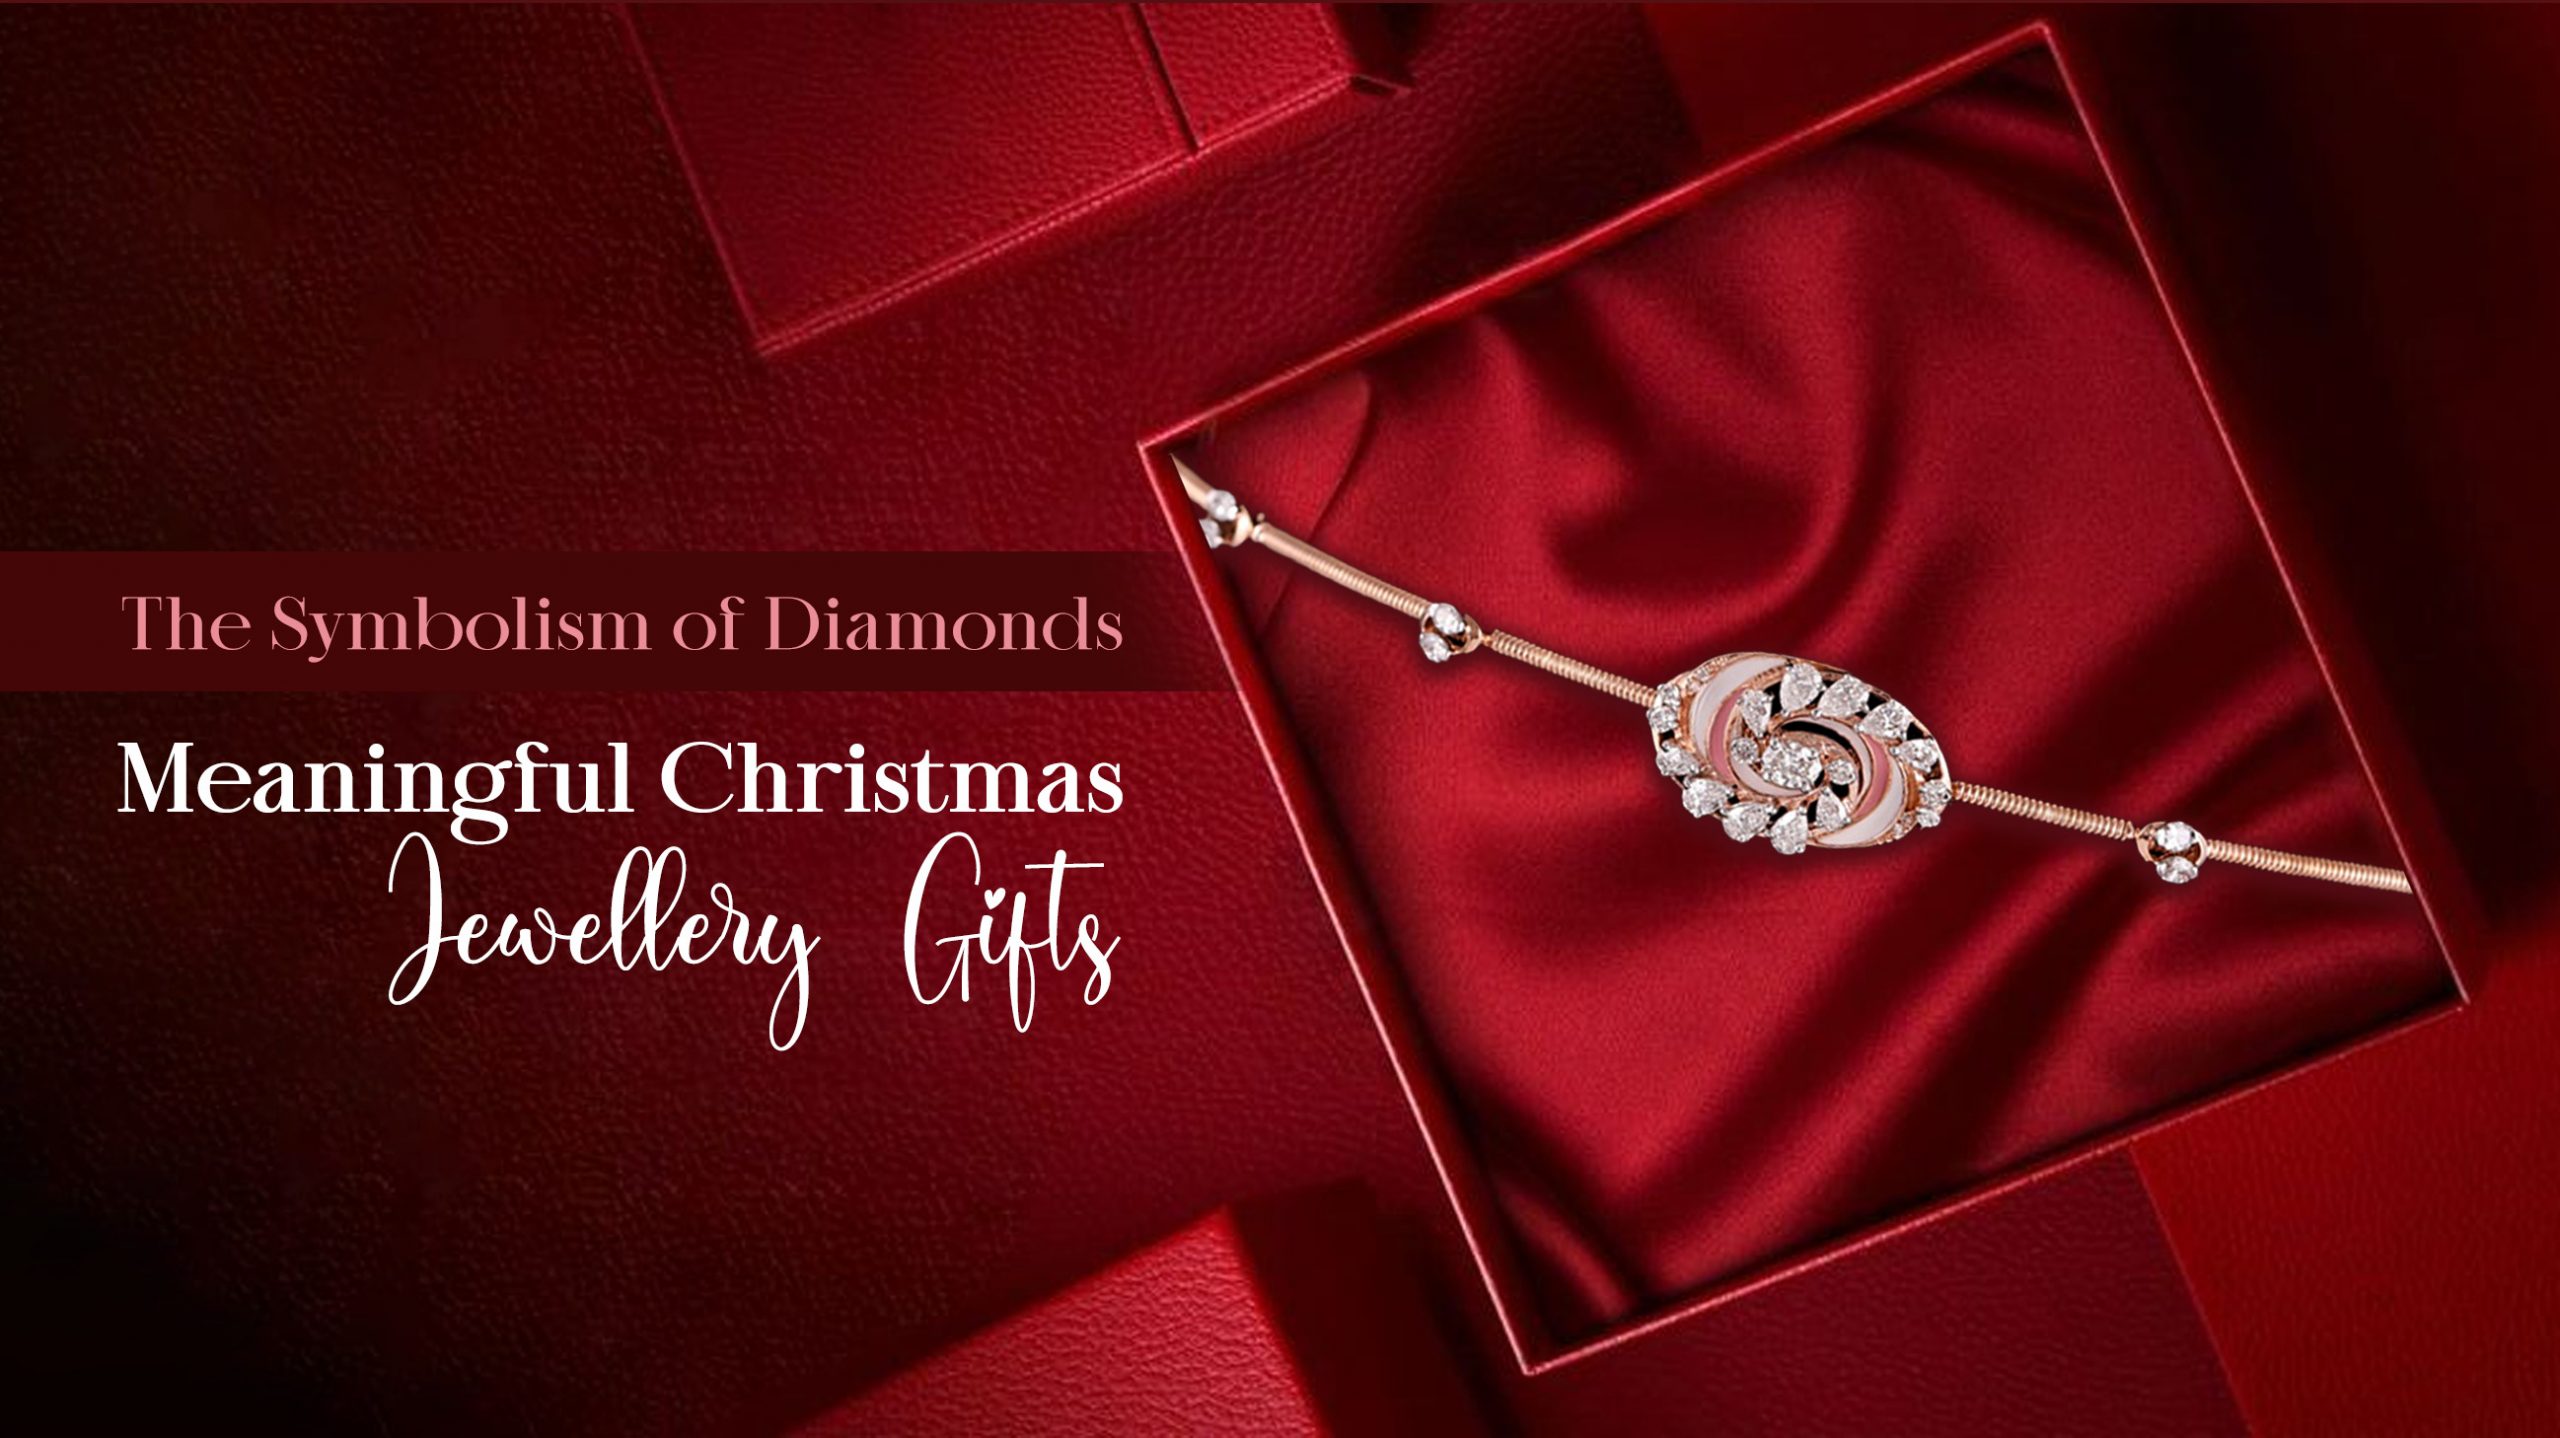 The Symbolism of Diamonds: Meaningful Christmas Jewelry Gifts